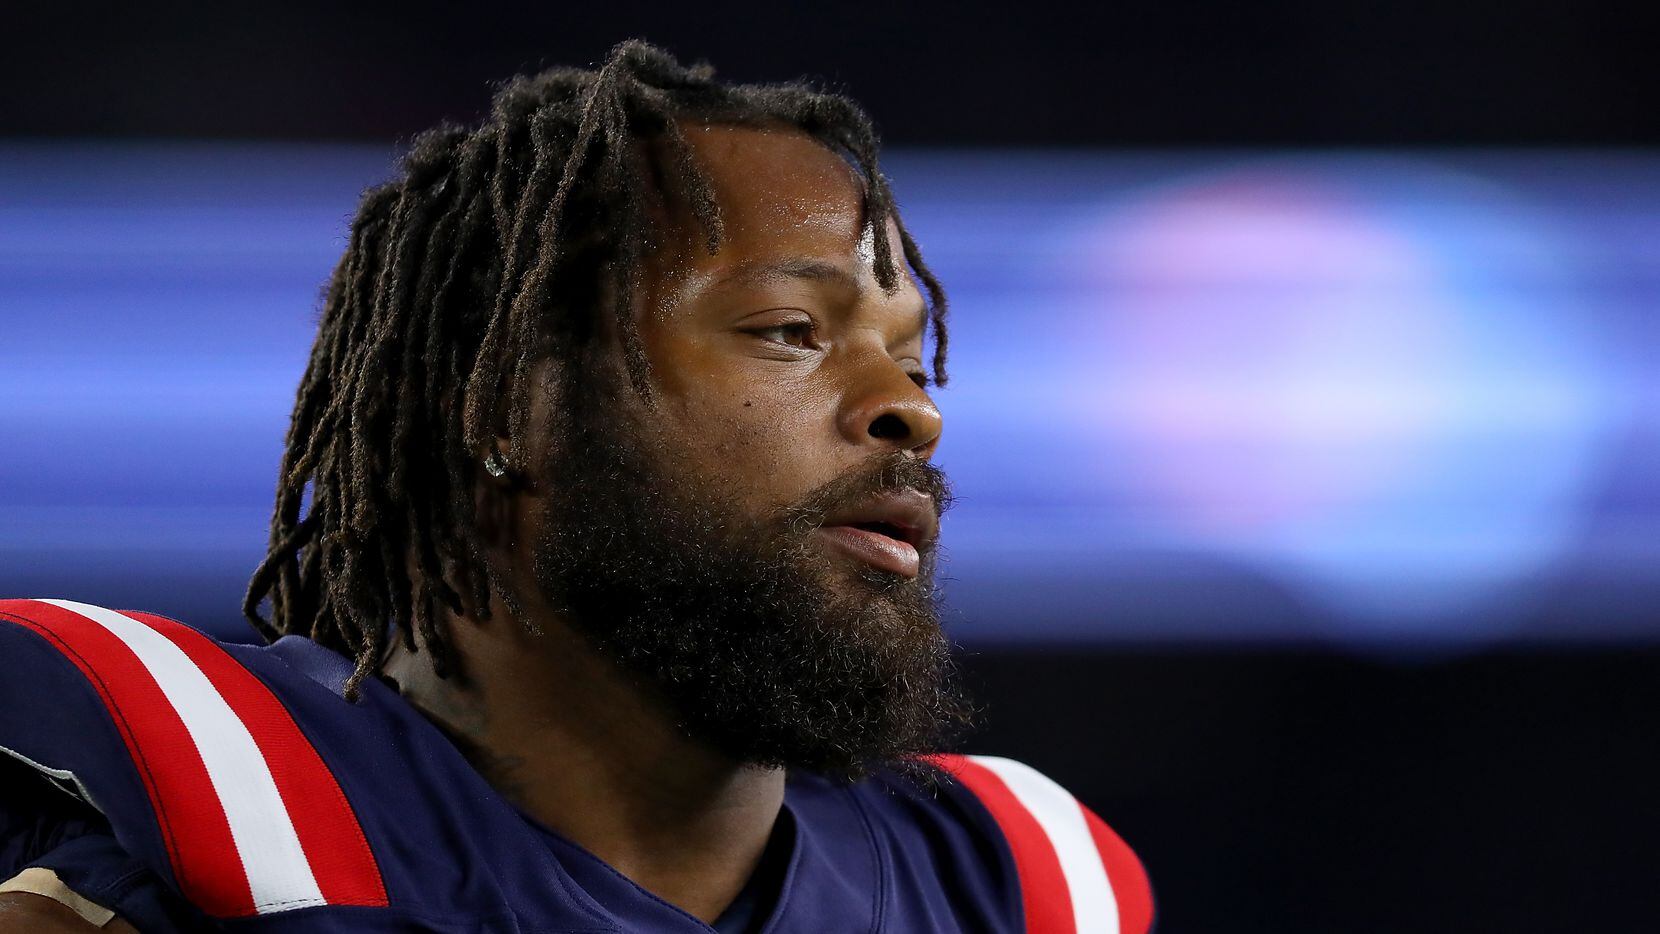 FOXBOROUGH, MASSACHUSETTS - OCTOBER 10: Michael Bennett #77 of the New England Patriots looks on prior to the game against the New York Giants at Gillette Stadium on October 10, 2019 in Foxborough, Massachusetts. (Photo by Maddie Meyer/Getty Images)